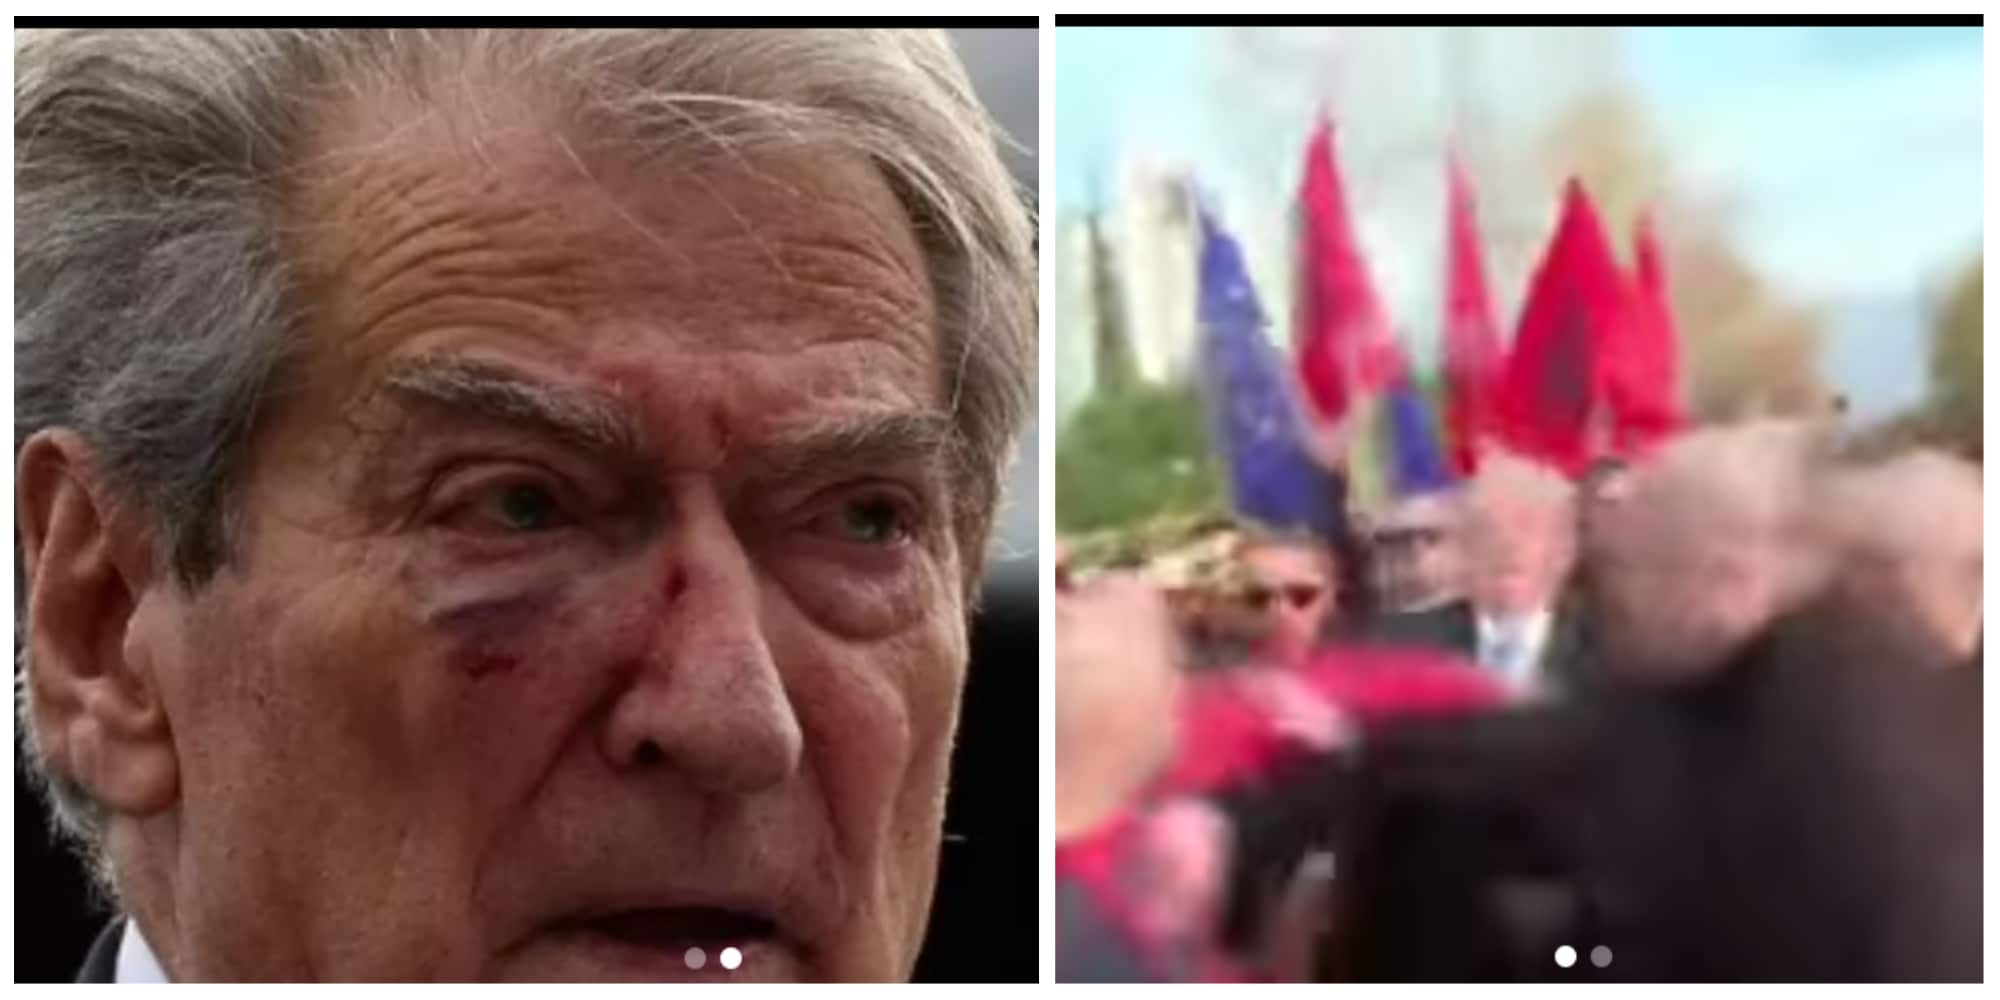 Nigerians React As Thug Punches Former Albanian President Sali Berisha In The Face (Video)